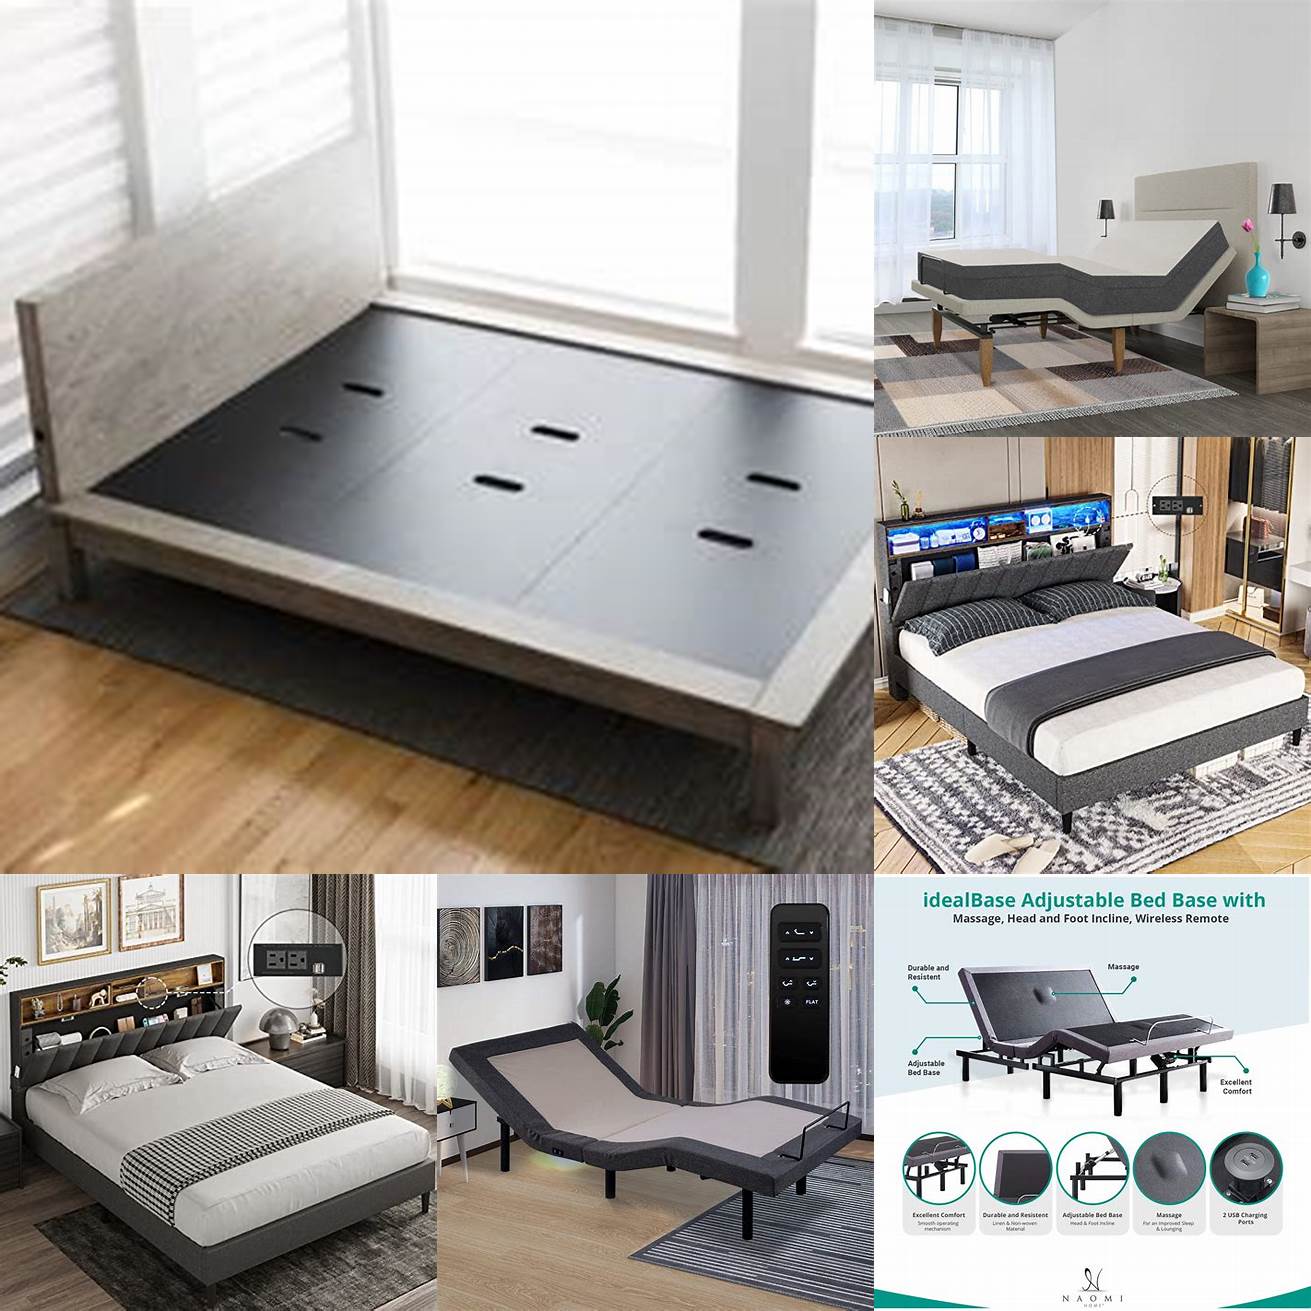 The bed has USB ports that allow you to charge your phone or other devices